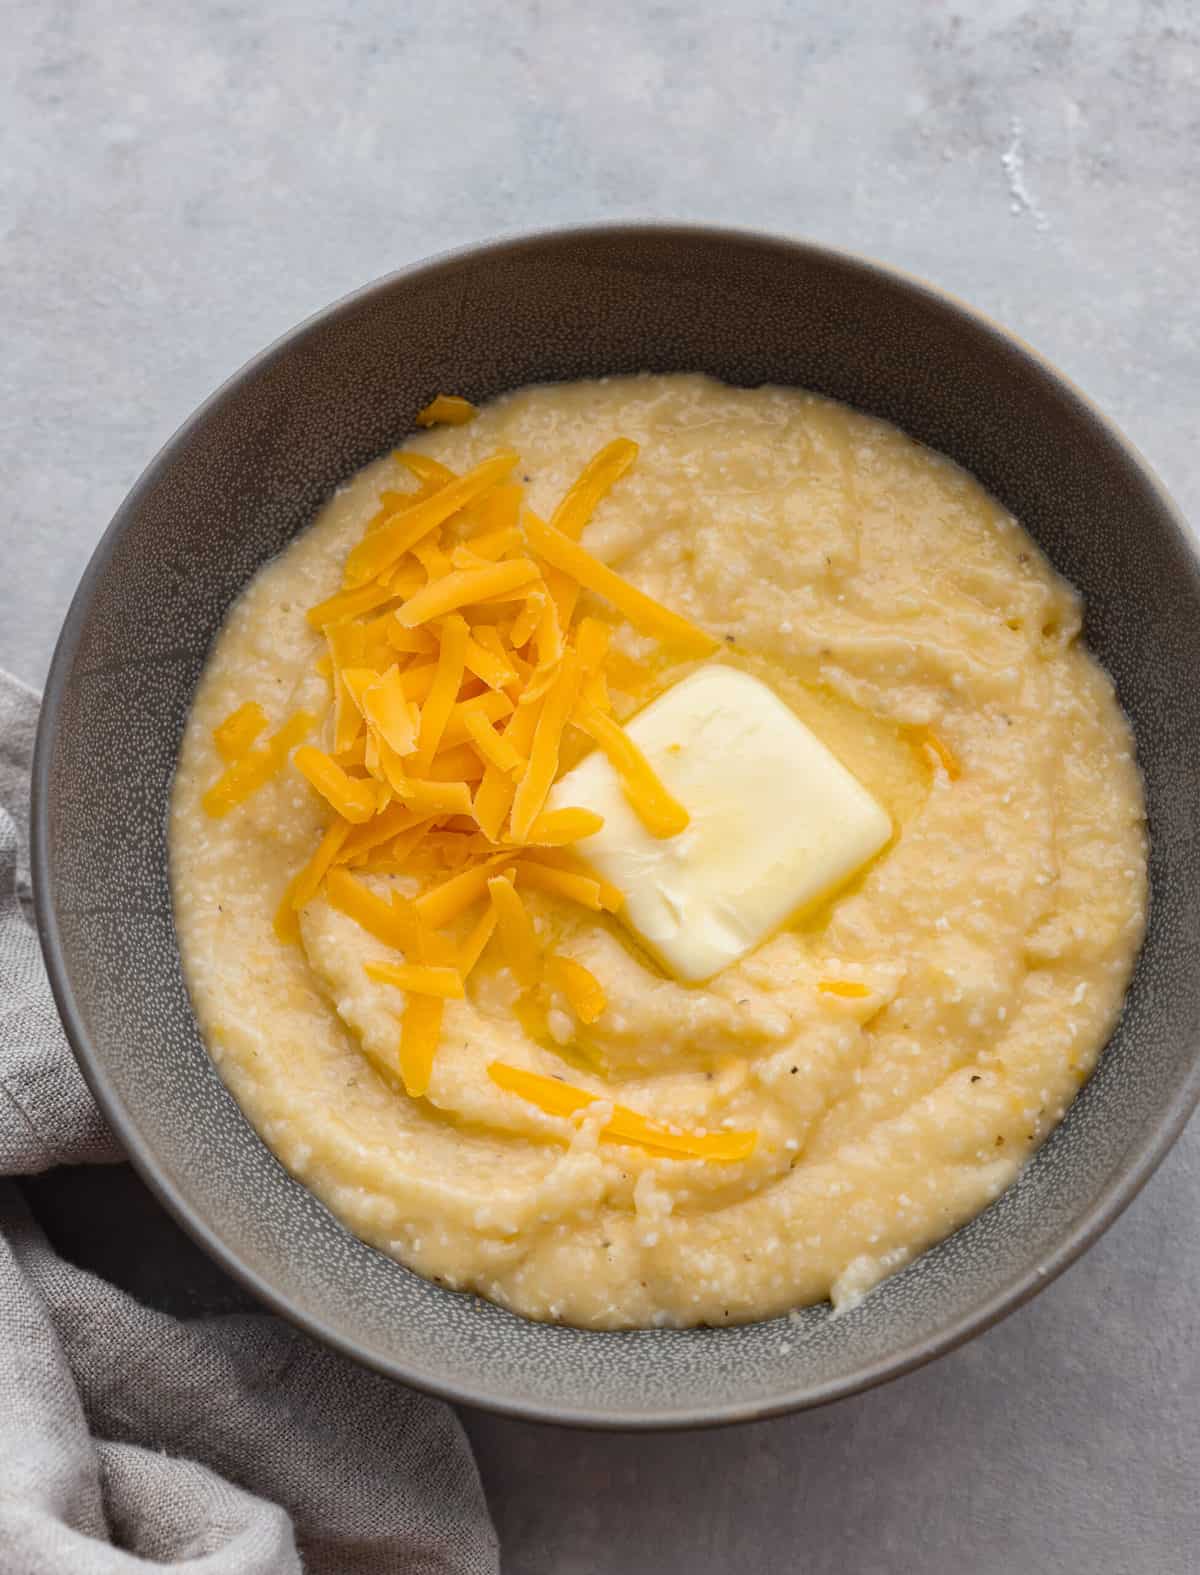 https://therecipecritic.com/wp-content/uploads/2022/05/cheesygrits-1-2-scaled.jpg